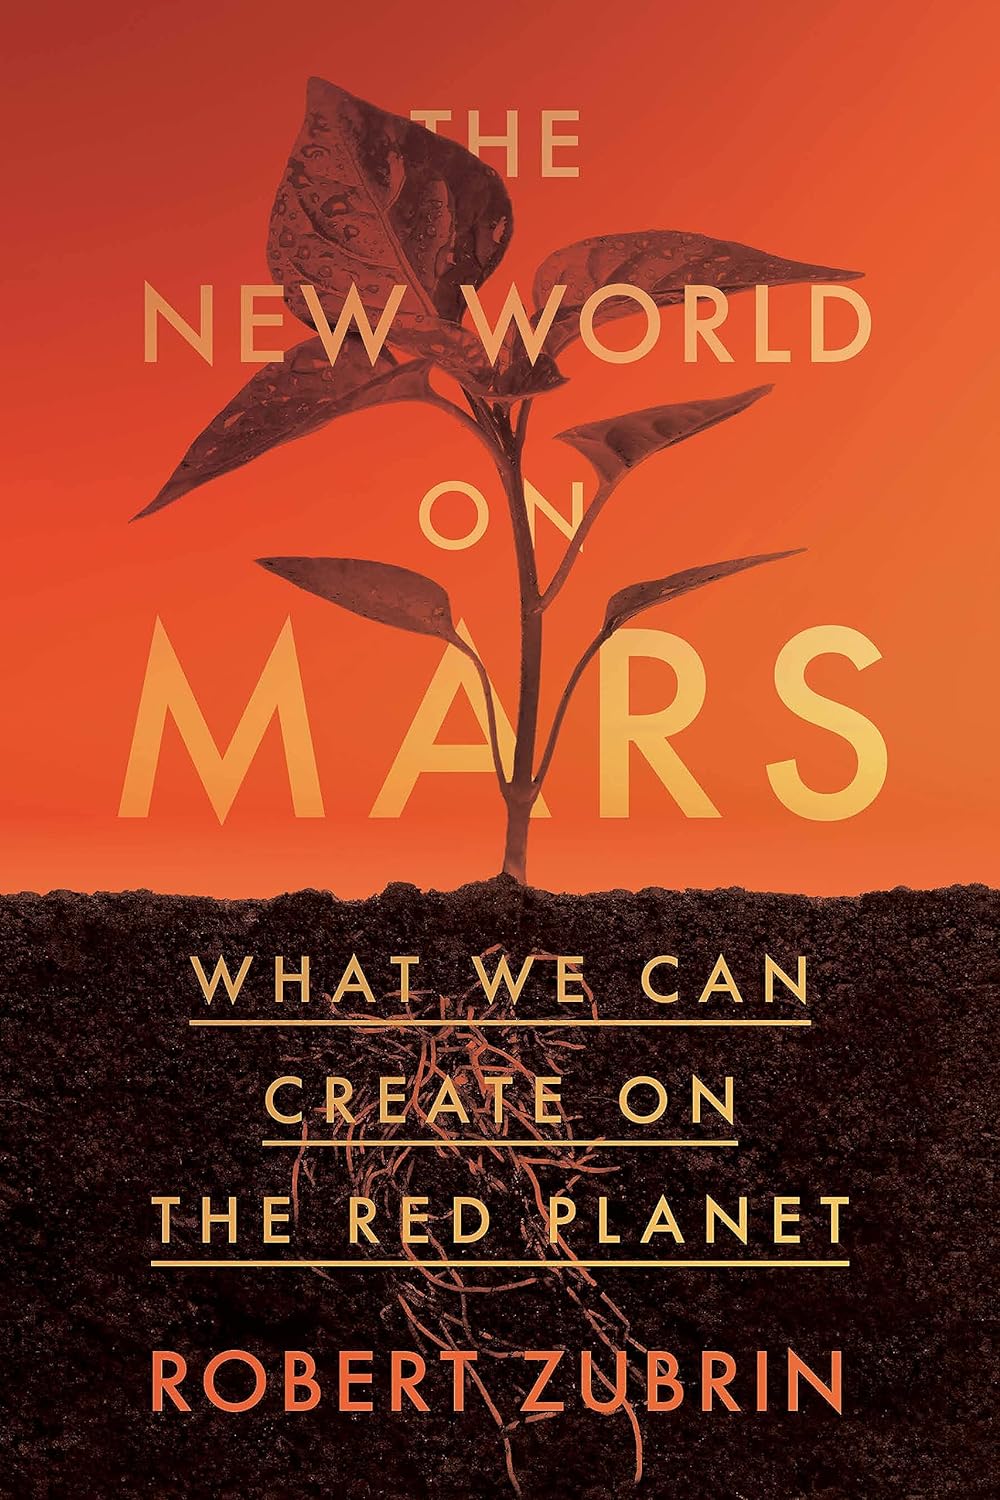 a book cover showing a planet growing in reddish soil behind the text 